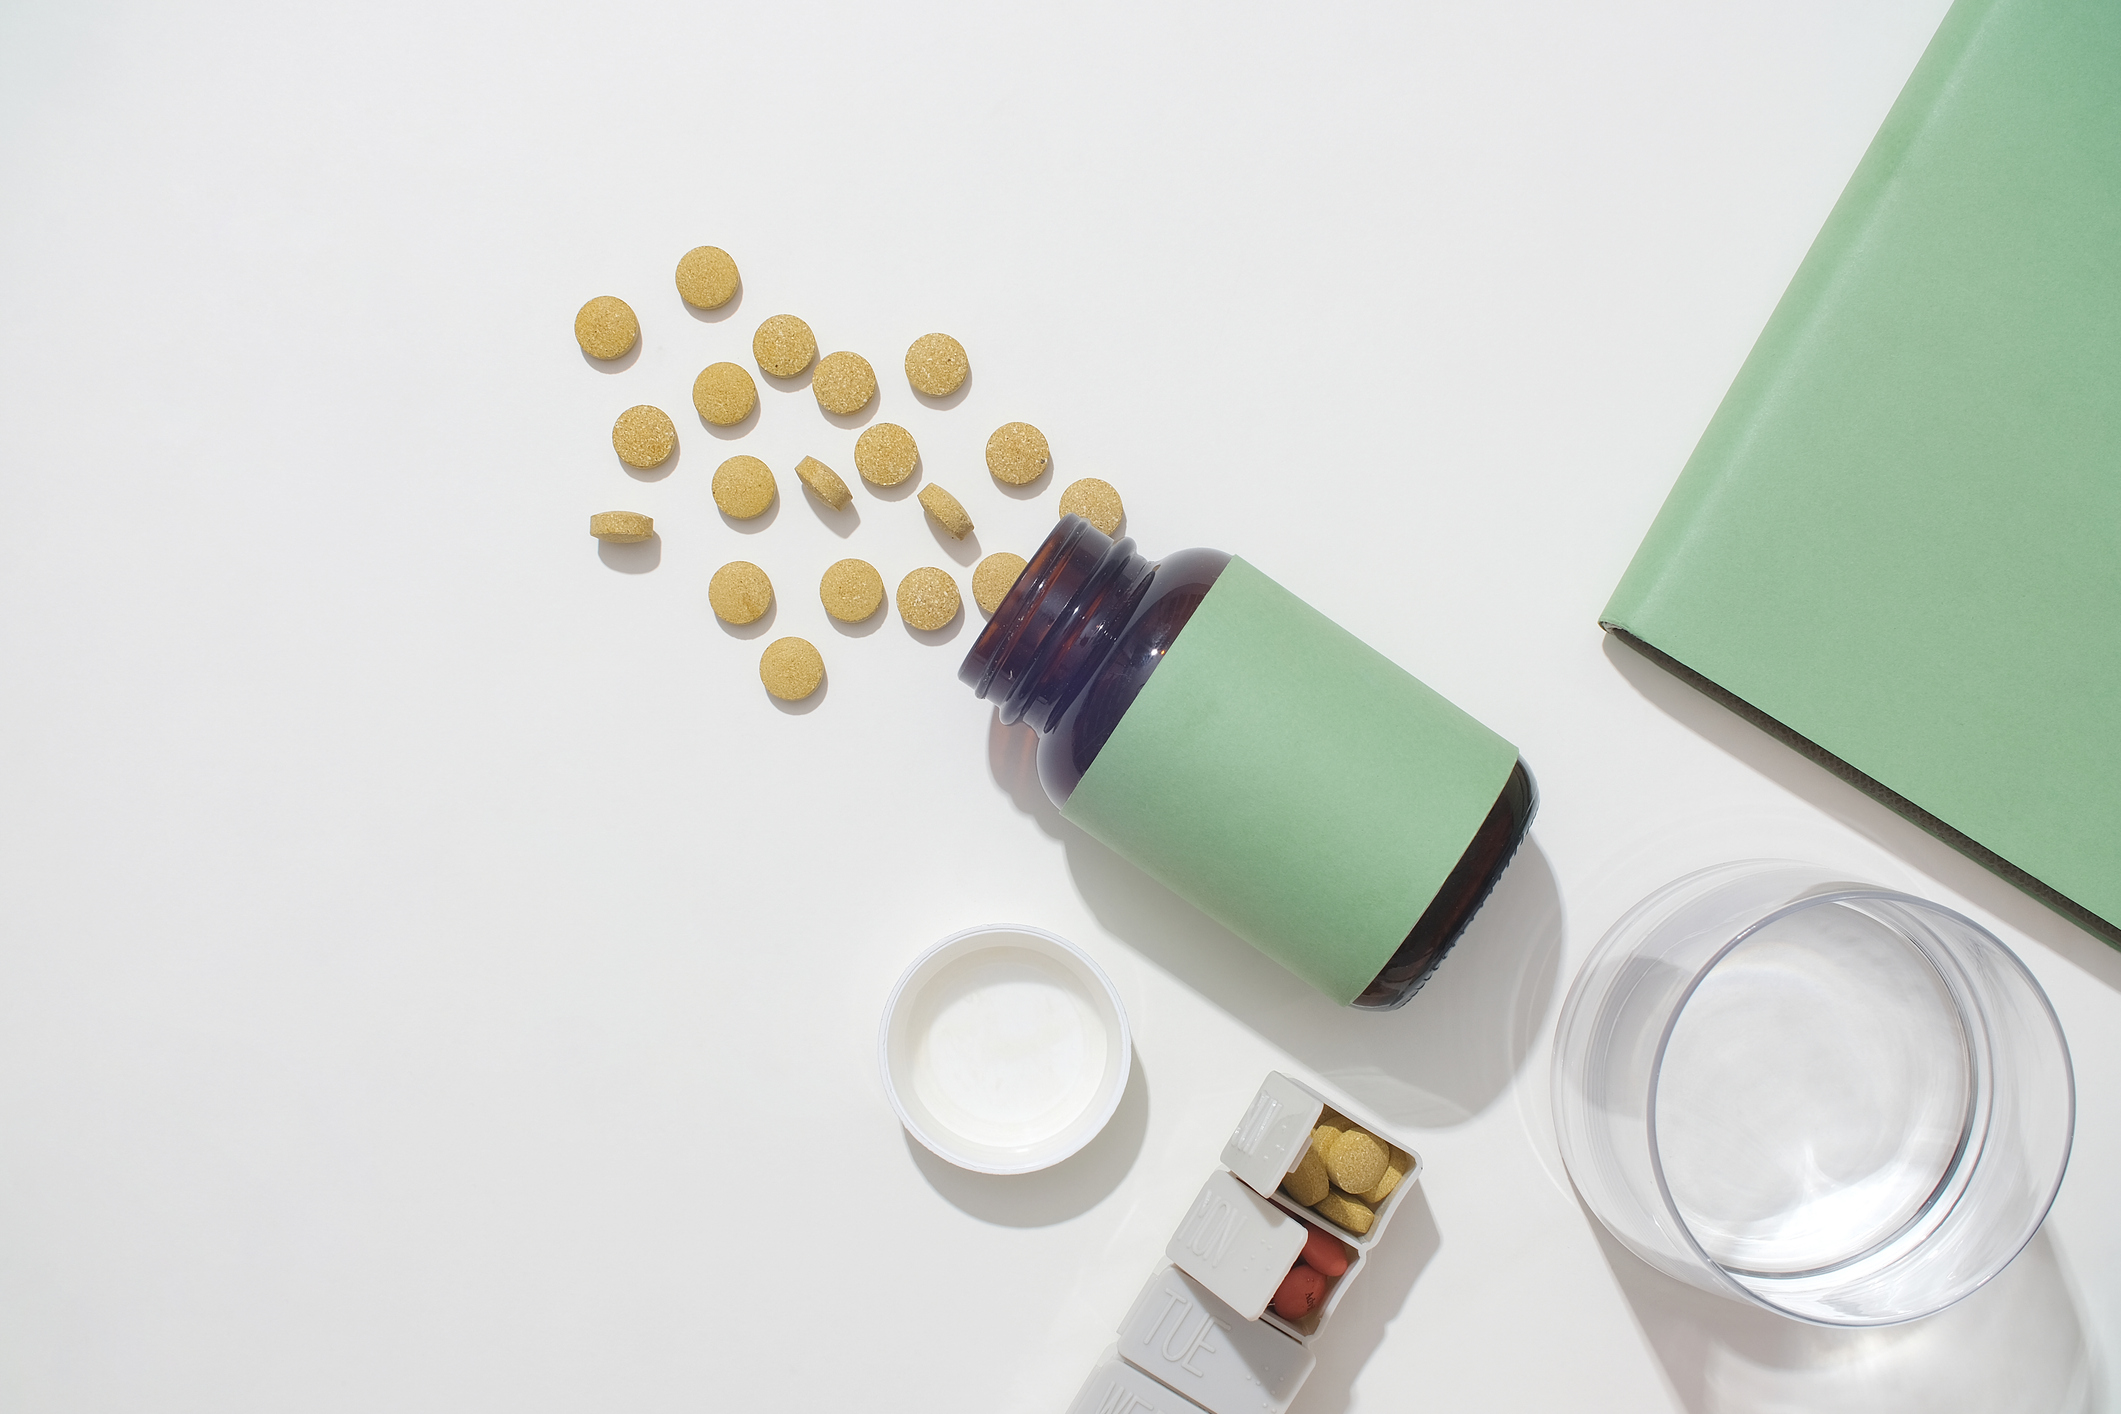 Top view of yellow tablets poured onto the table from an unbranded medicine bottle, a glass of water, a daily pill box and a notebook on a white background. Drug advertising.